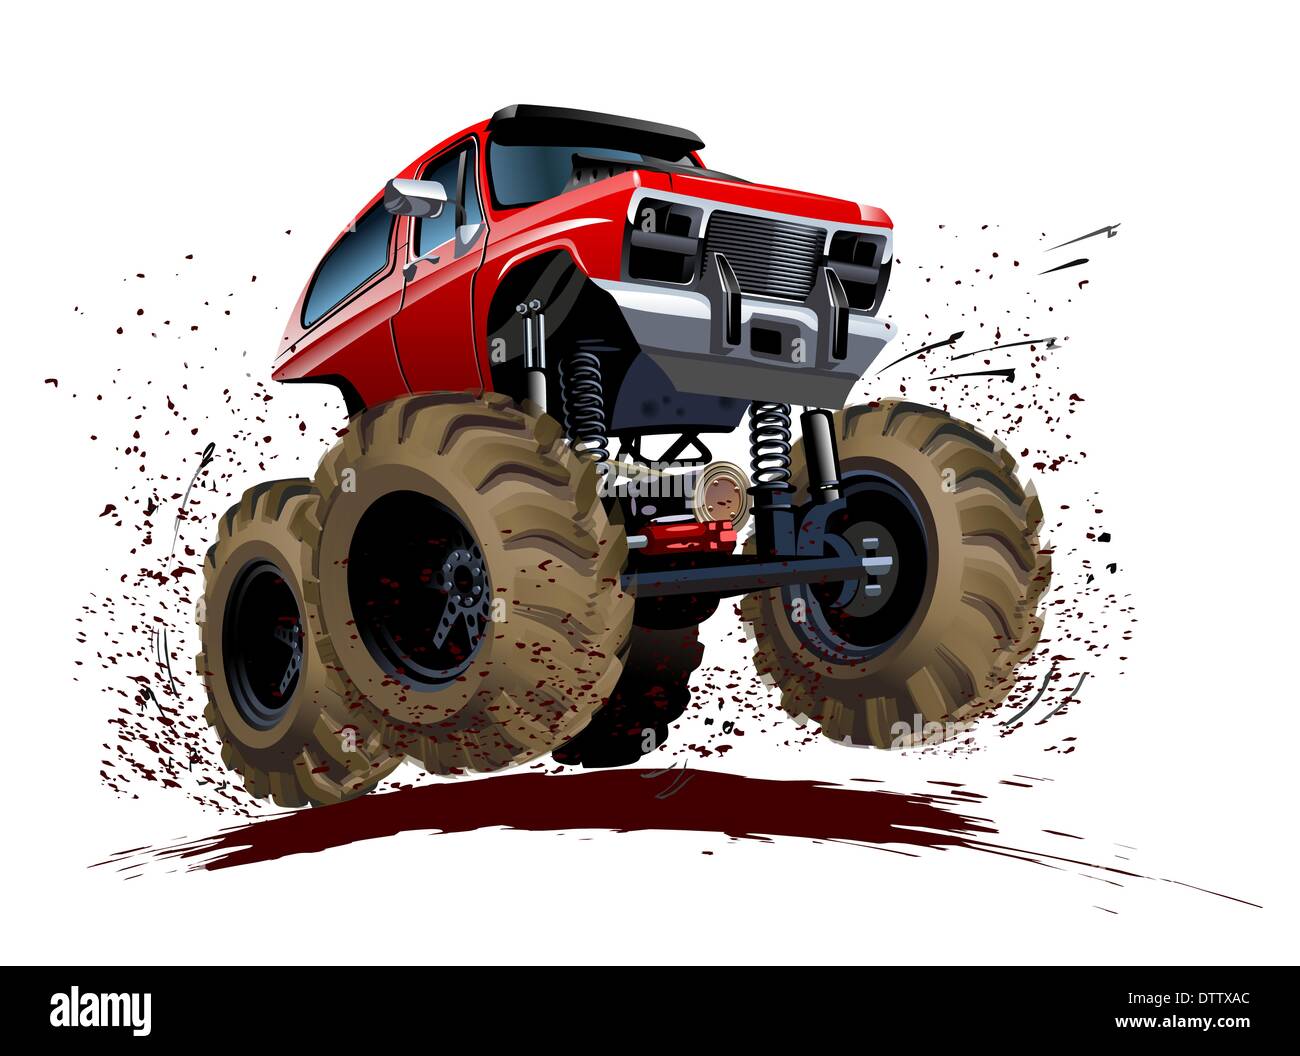 Monster truck jump Cut Out Stock Images & Pictures - Alamy